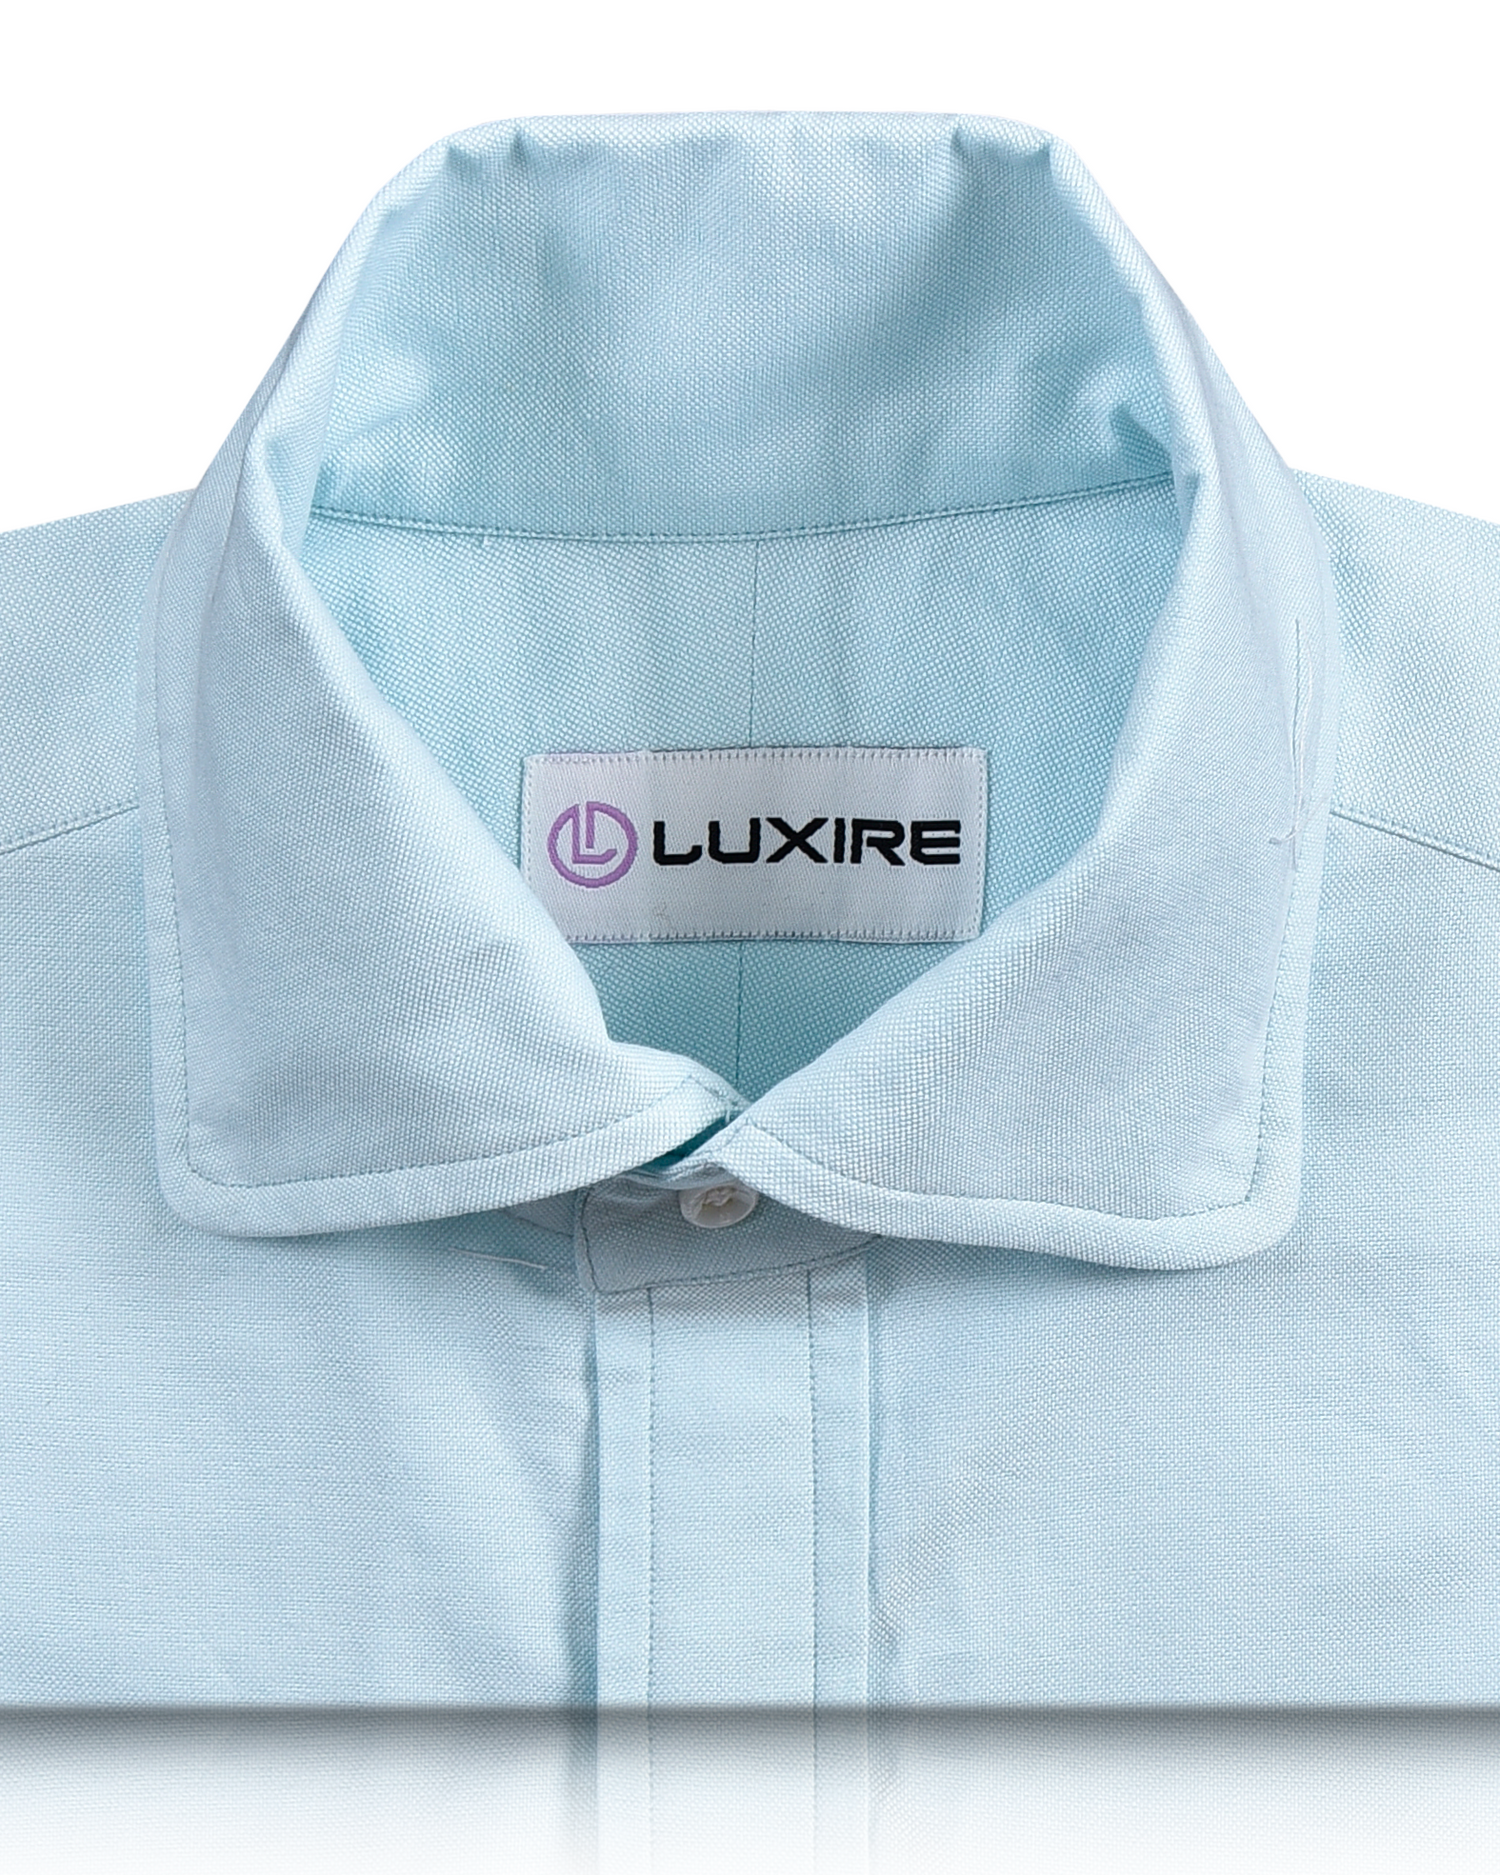 Collar of the custom oxford shirt for men by Luxire in pale blue